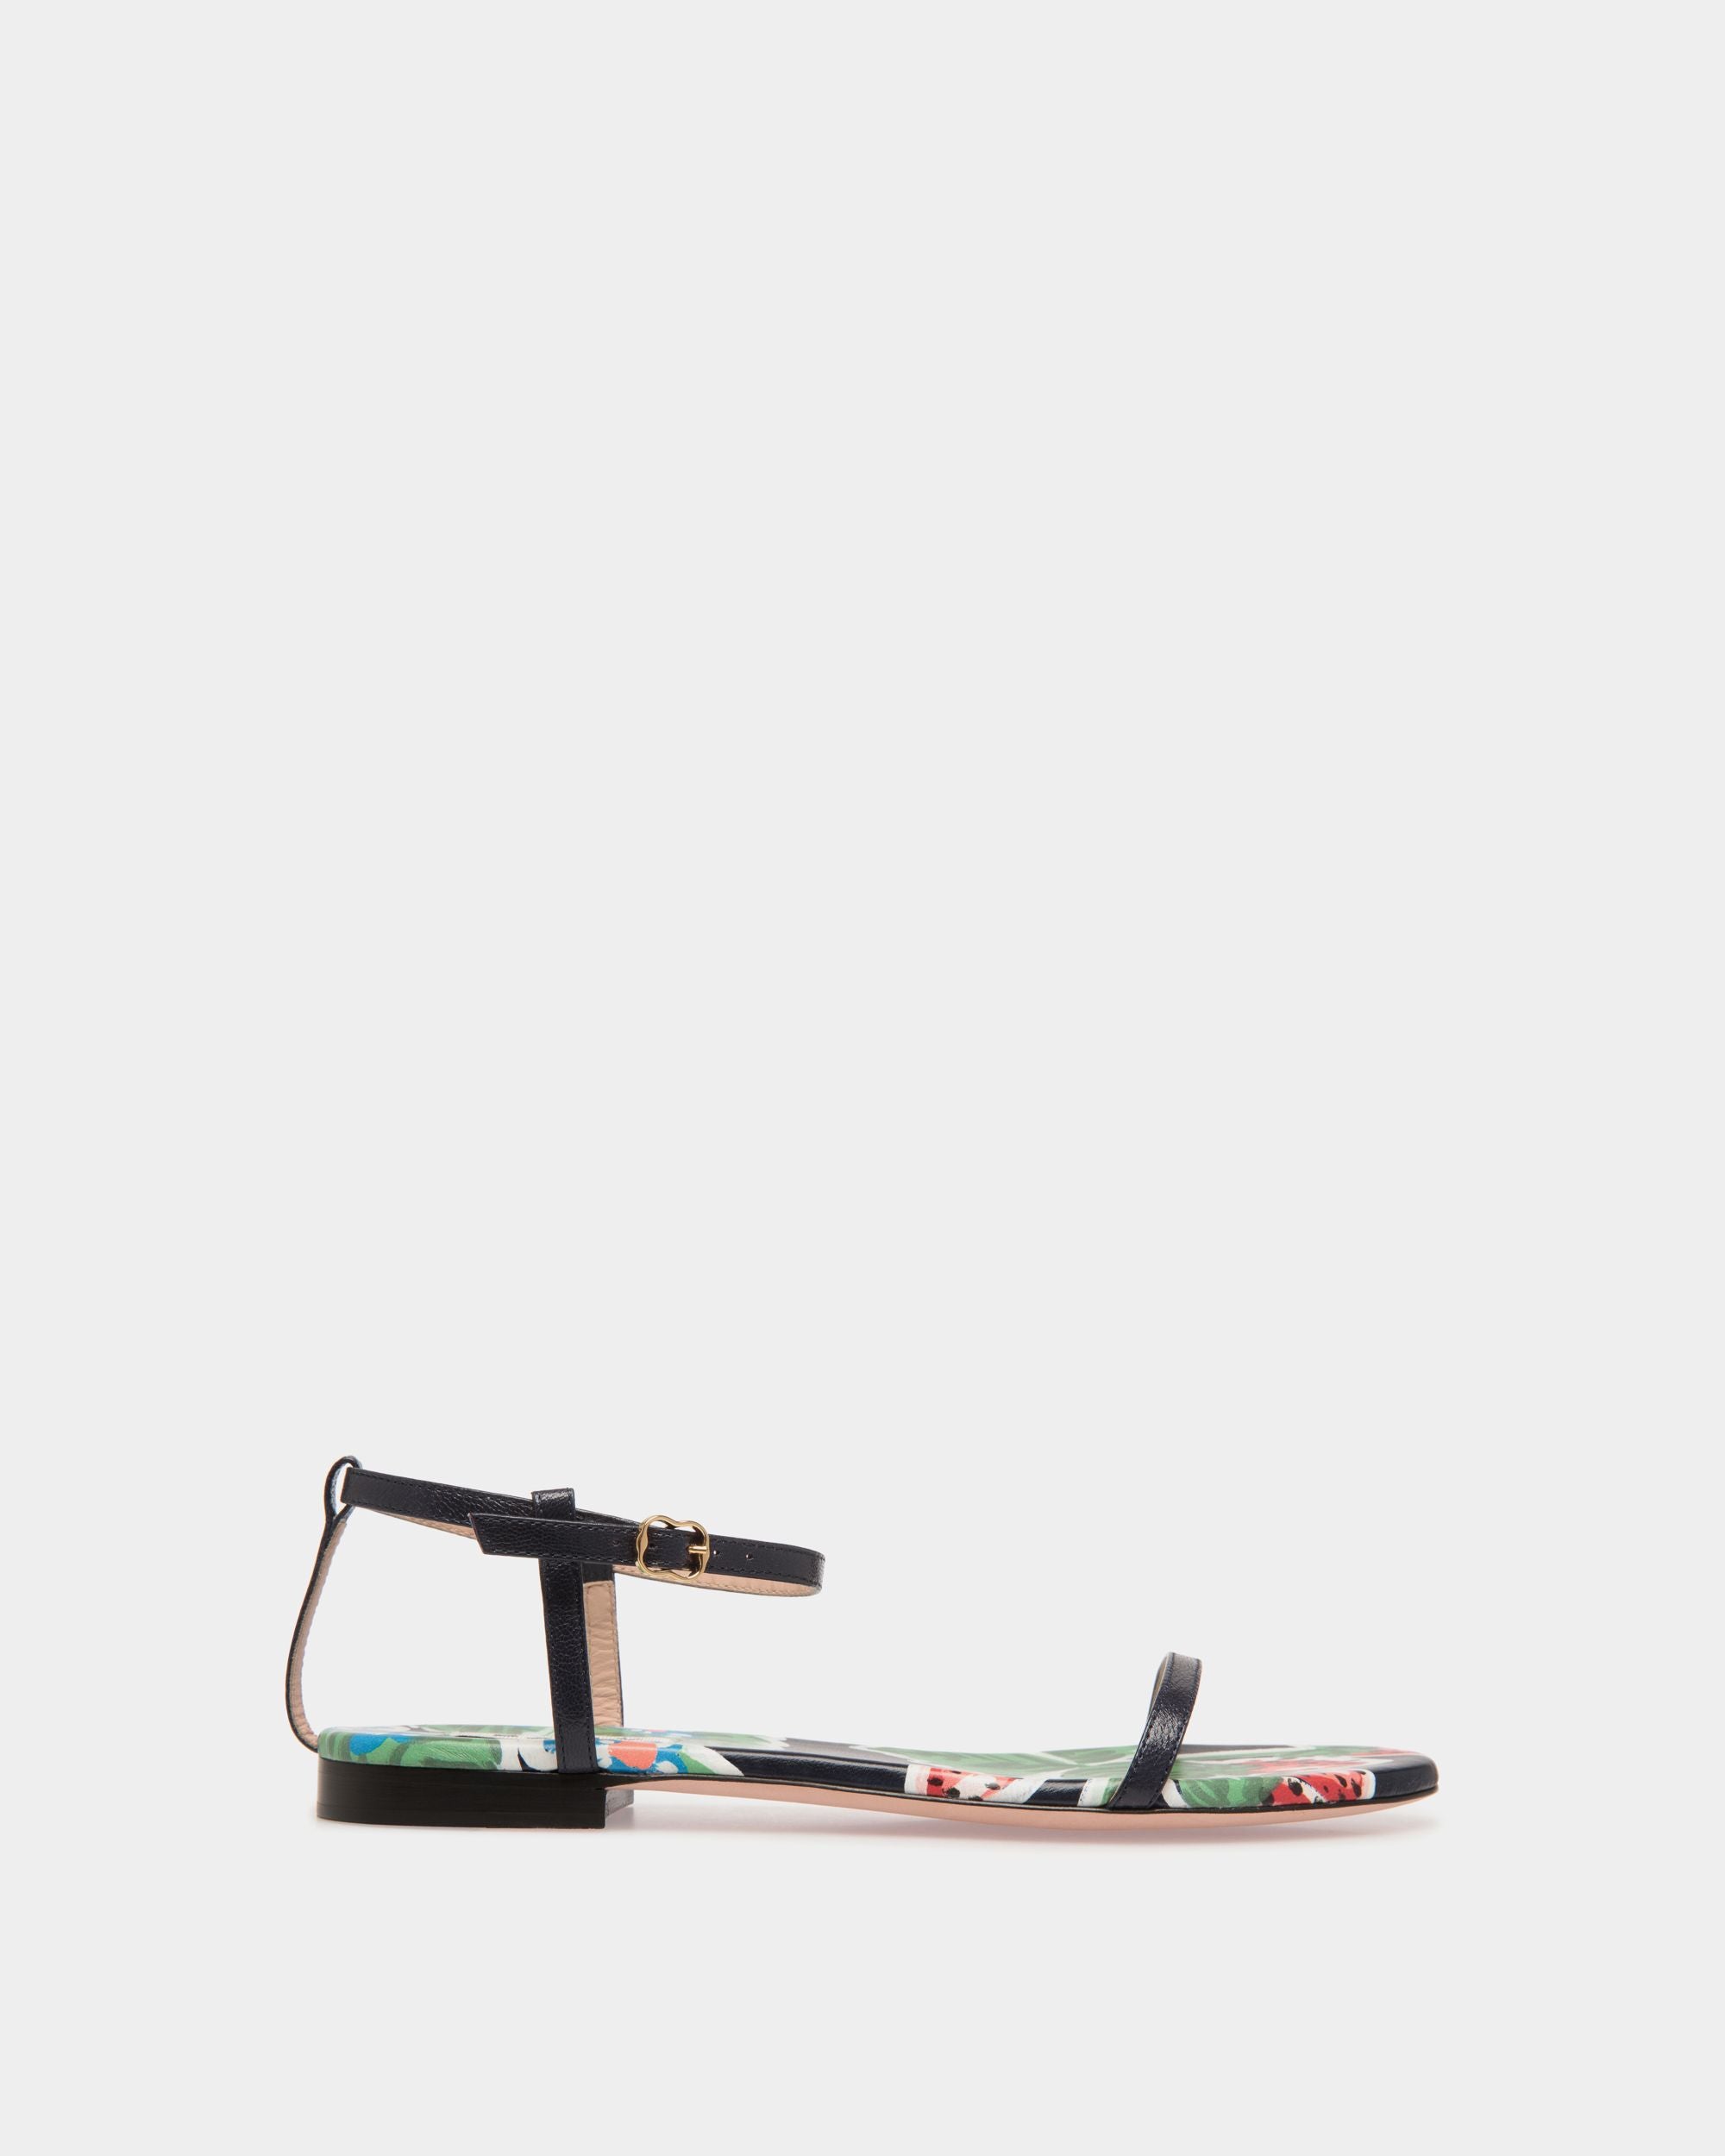 Katy | Women's Flat Sandal in Strawberry Print Brushed Leather | Bally | Still Life Side